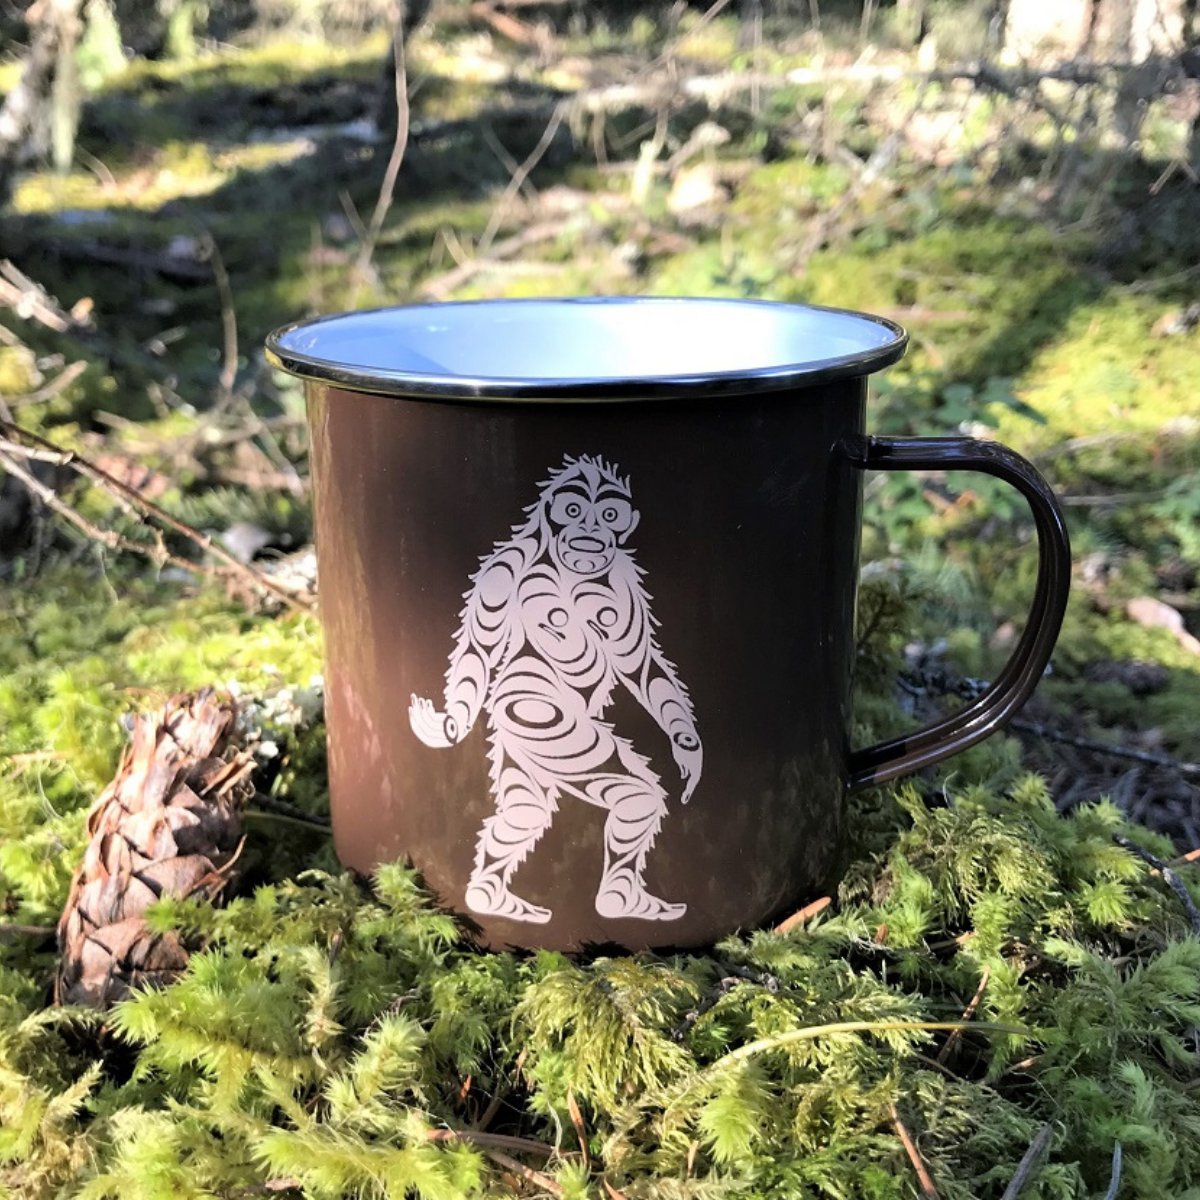 Sasquatch Big Foot – All The Good Things From BC